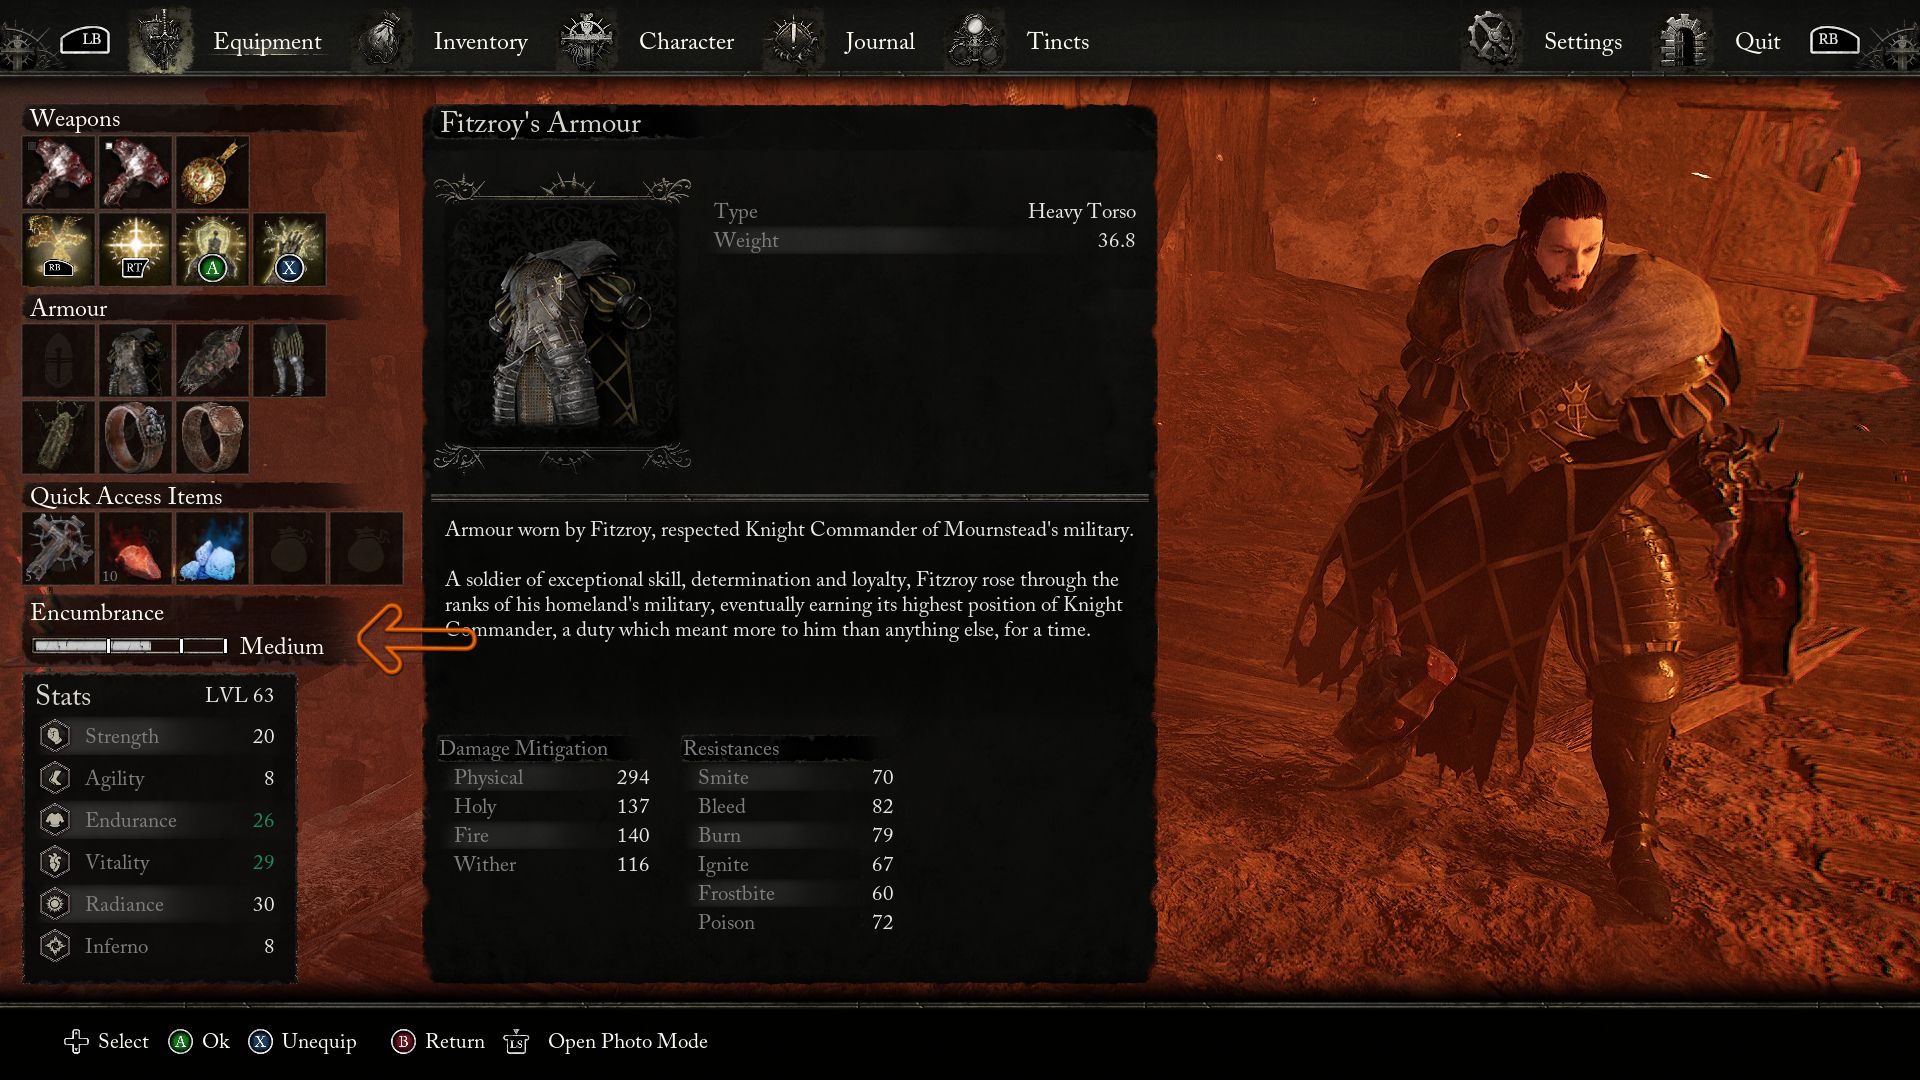 An arrow showing the Encumbrance bar that indicates the player's weight in Lords of the Fallen